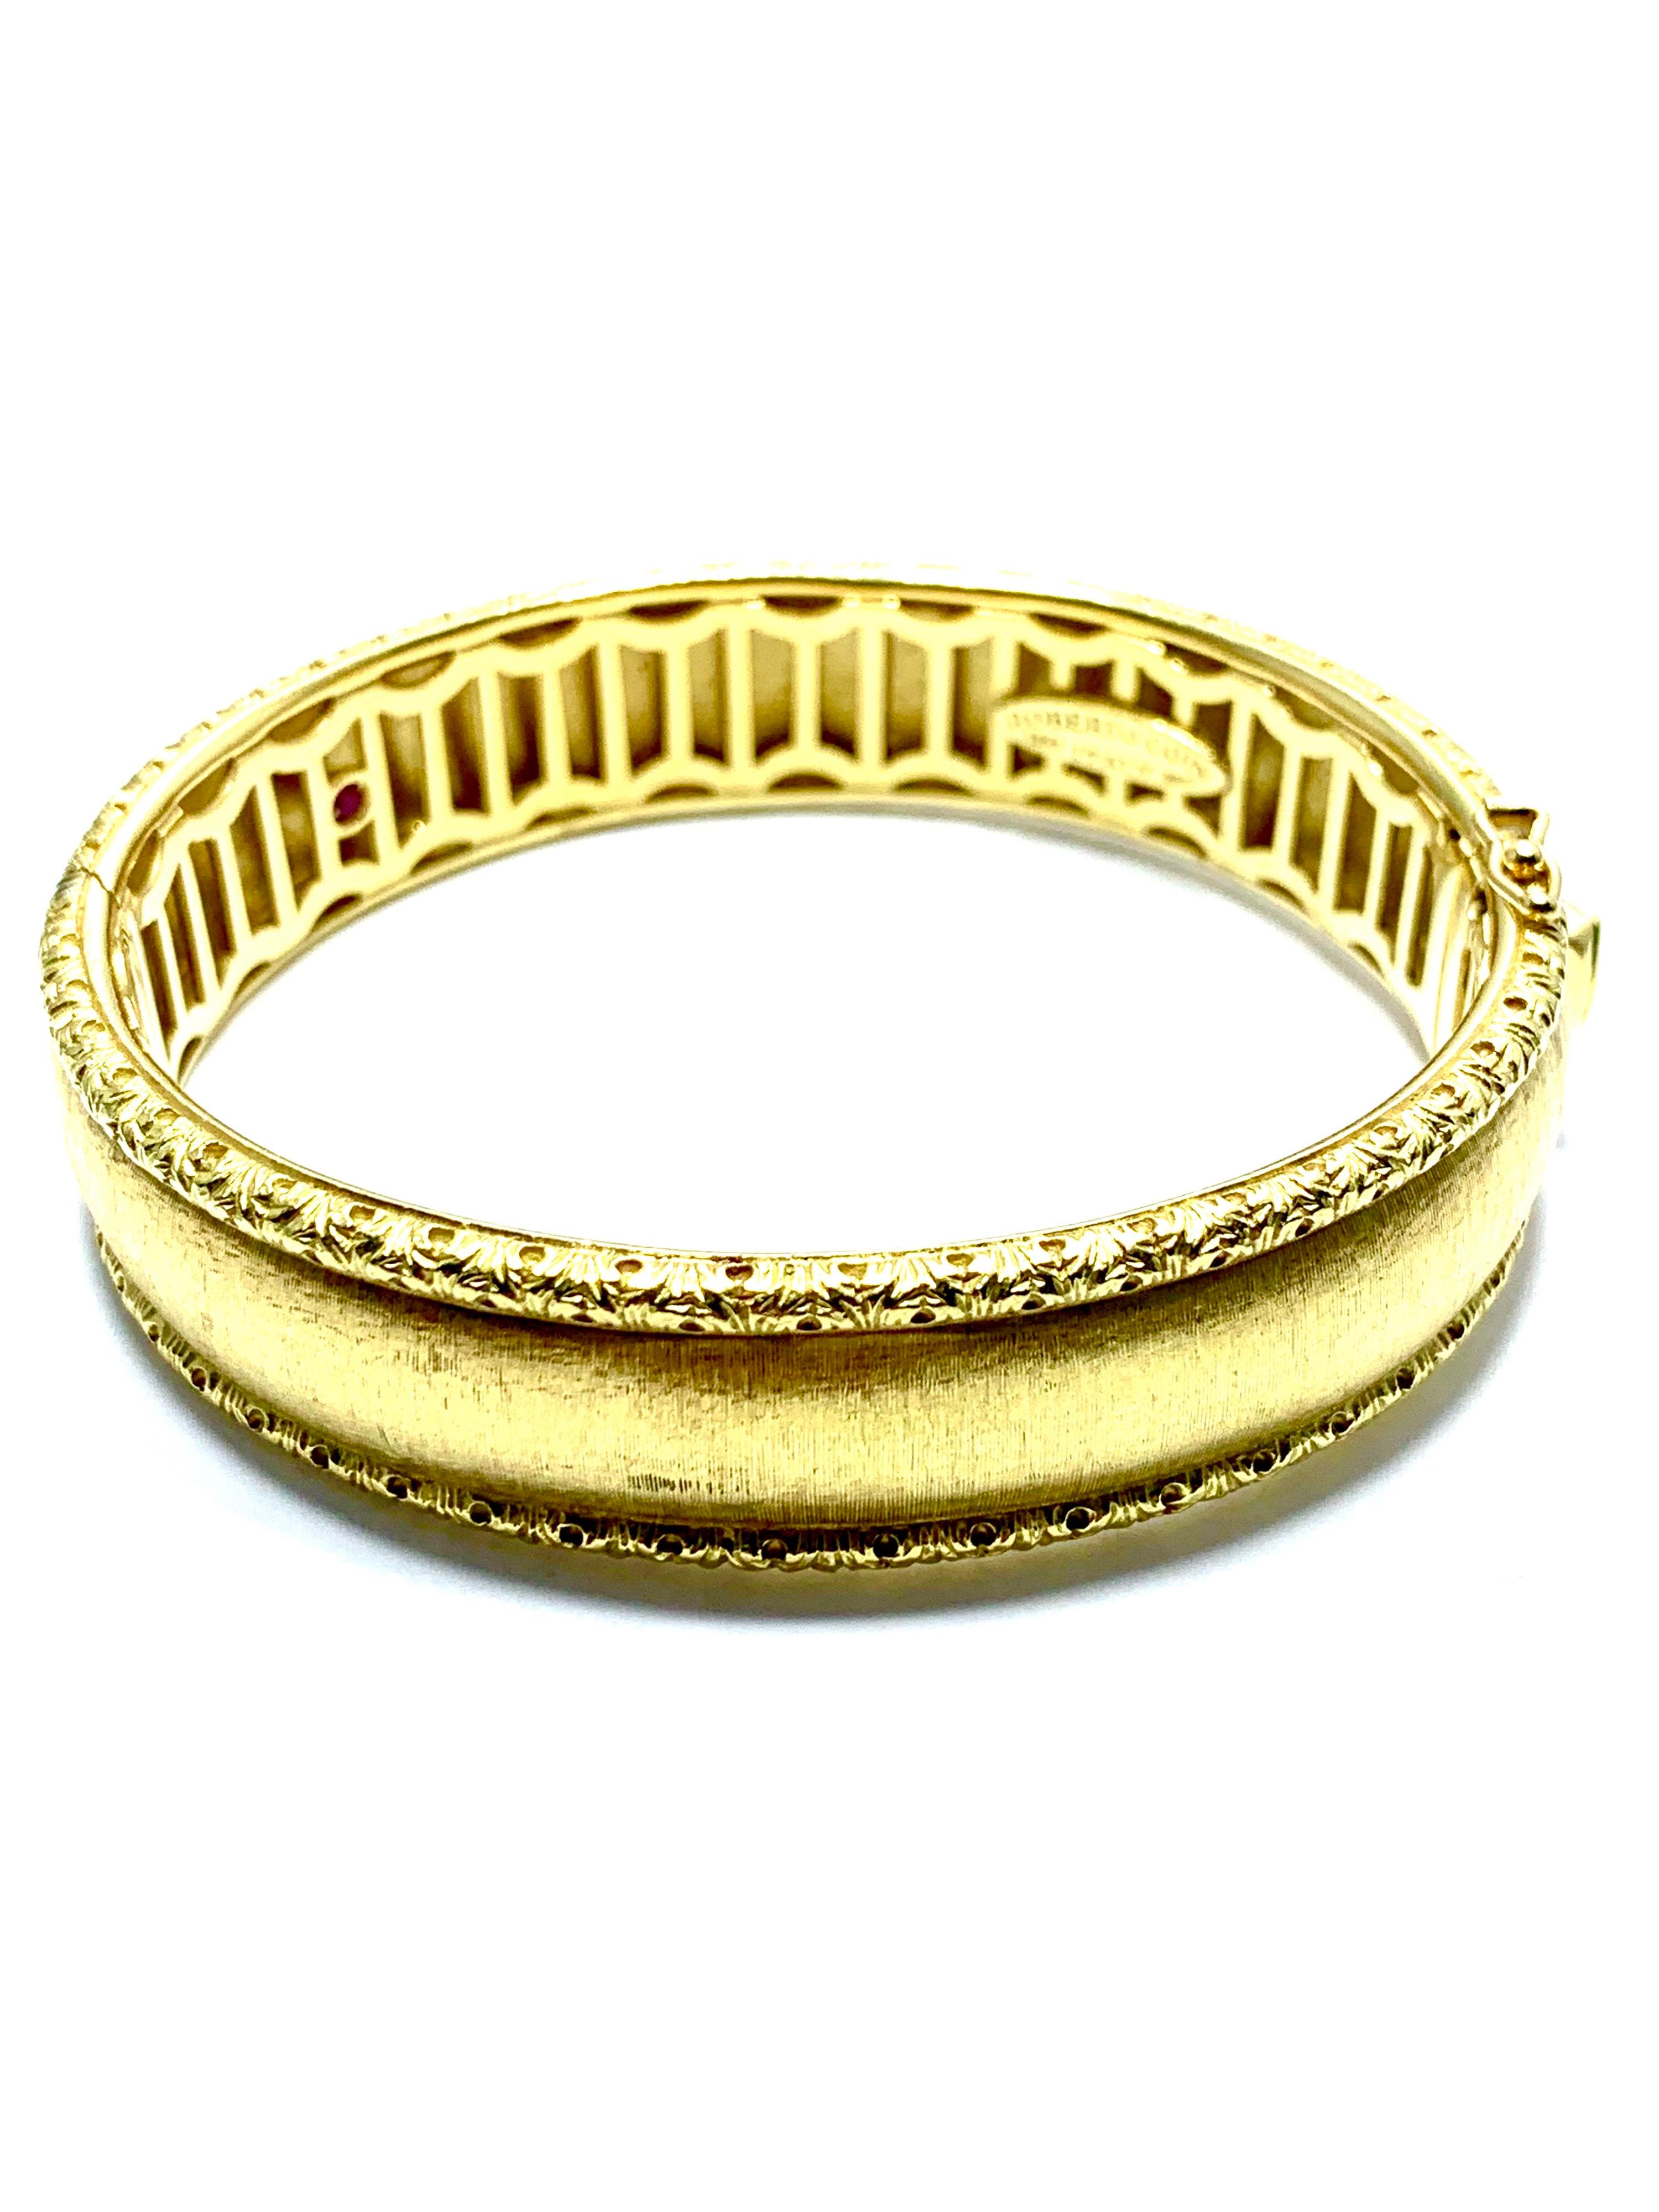 A beautiful 18 karat yellow gold bangle bracelet deigned by Roberto Coin.  The bracelet has a soft satin finish and features a marquise shaped ruby on the clasp, as well as a double safety catch.  The bracelet is slightly oval in shape to better fit